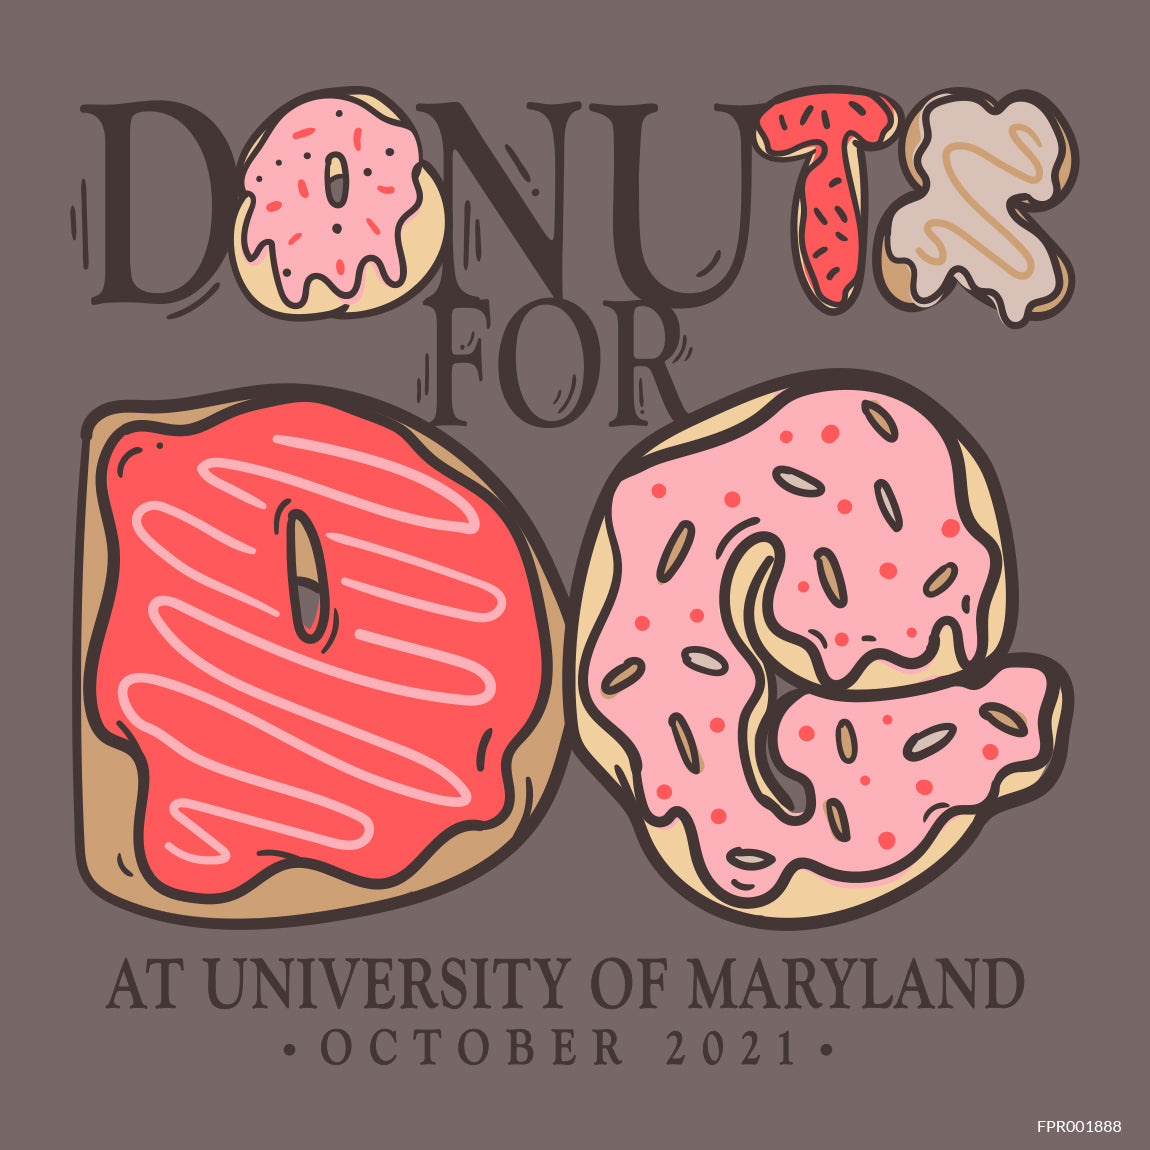 Donuts for DG